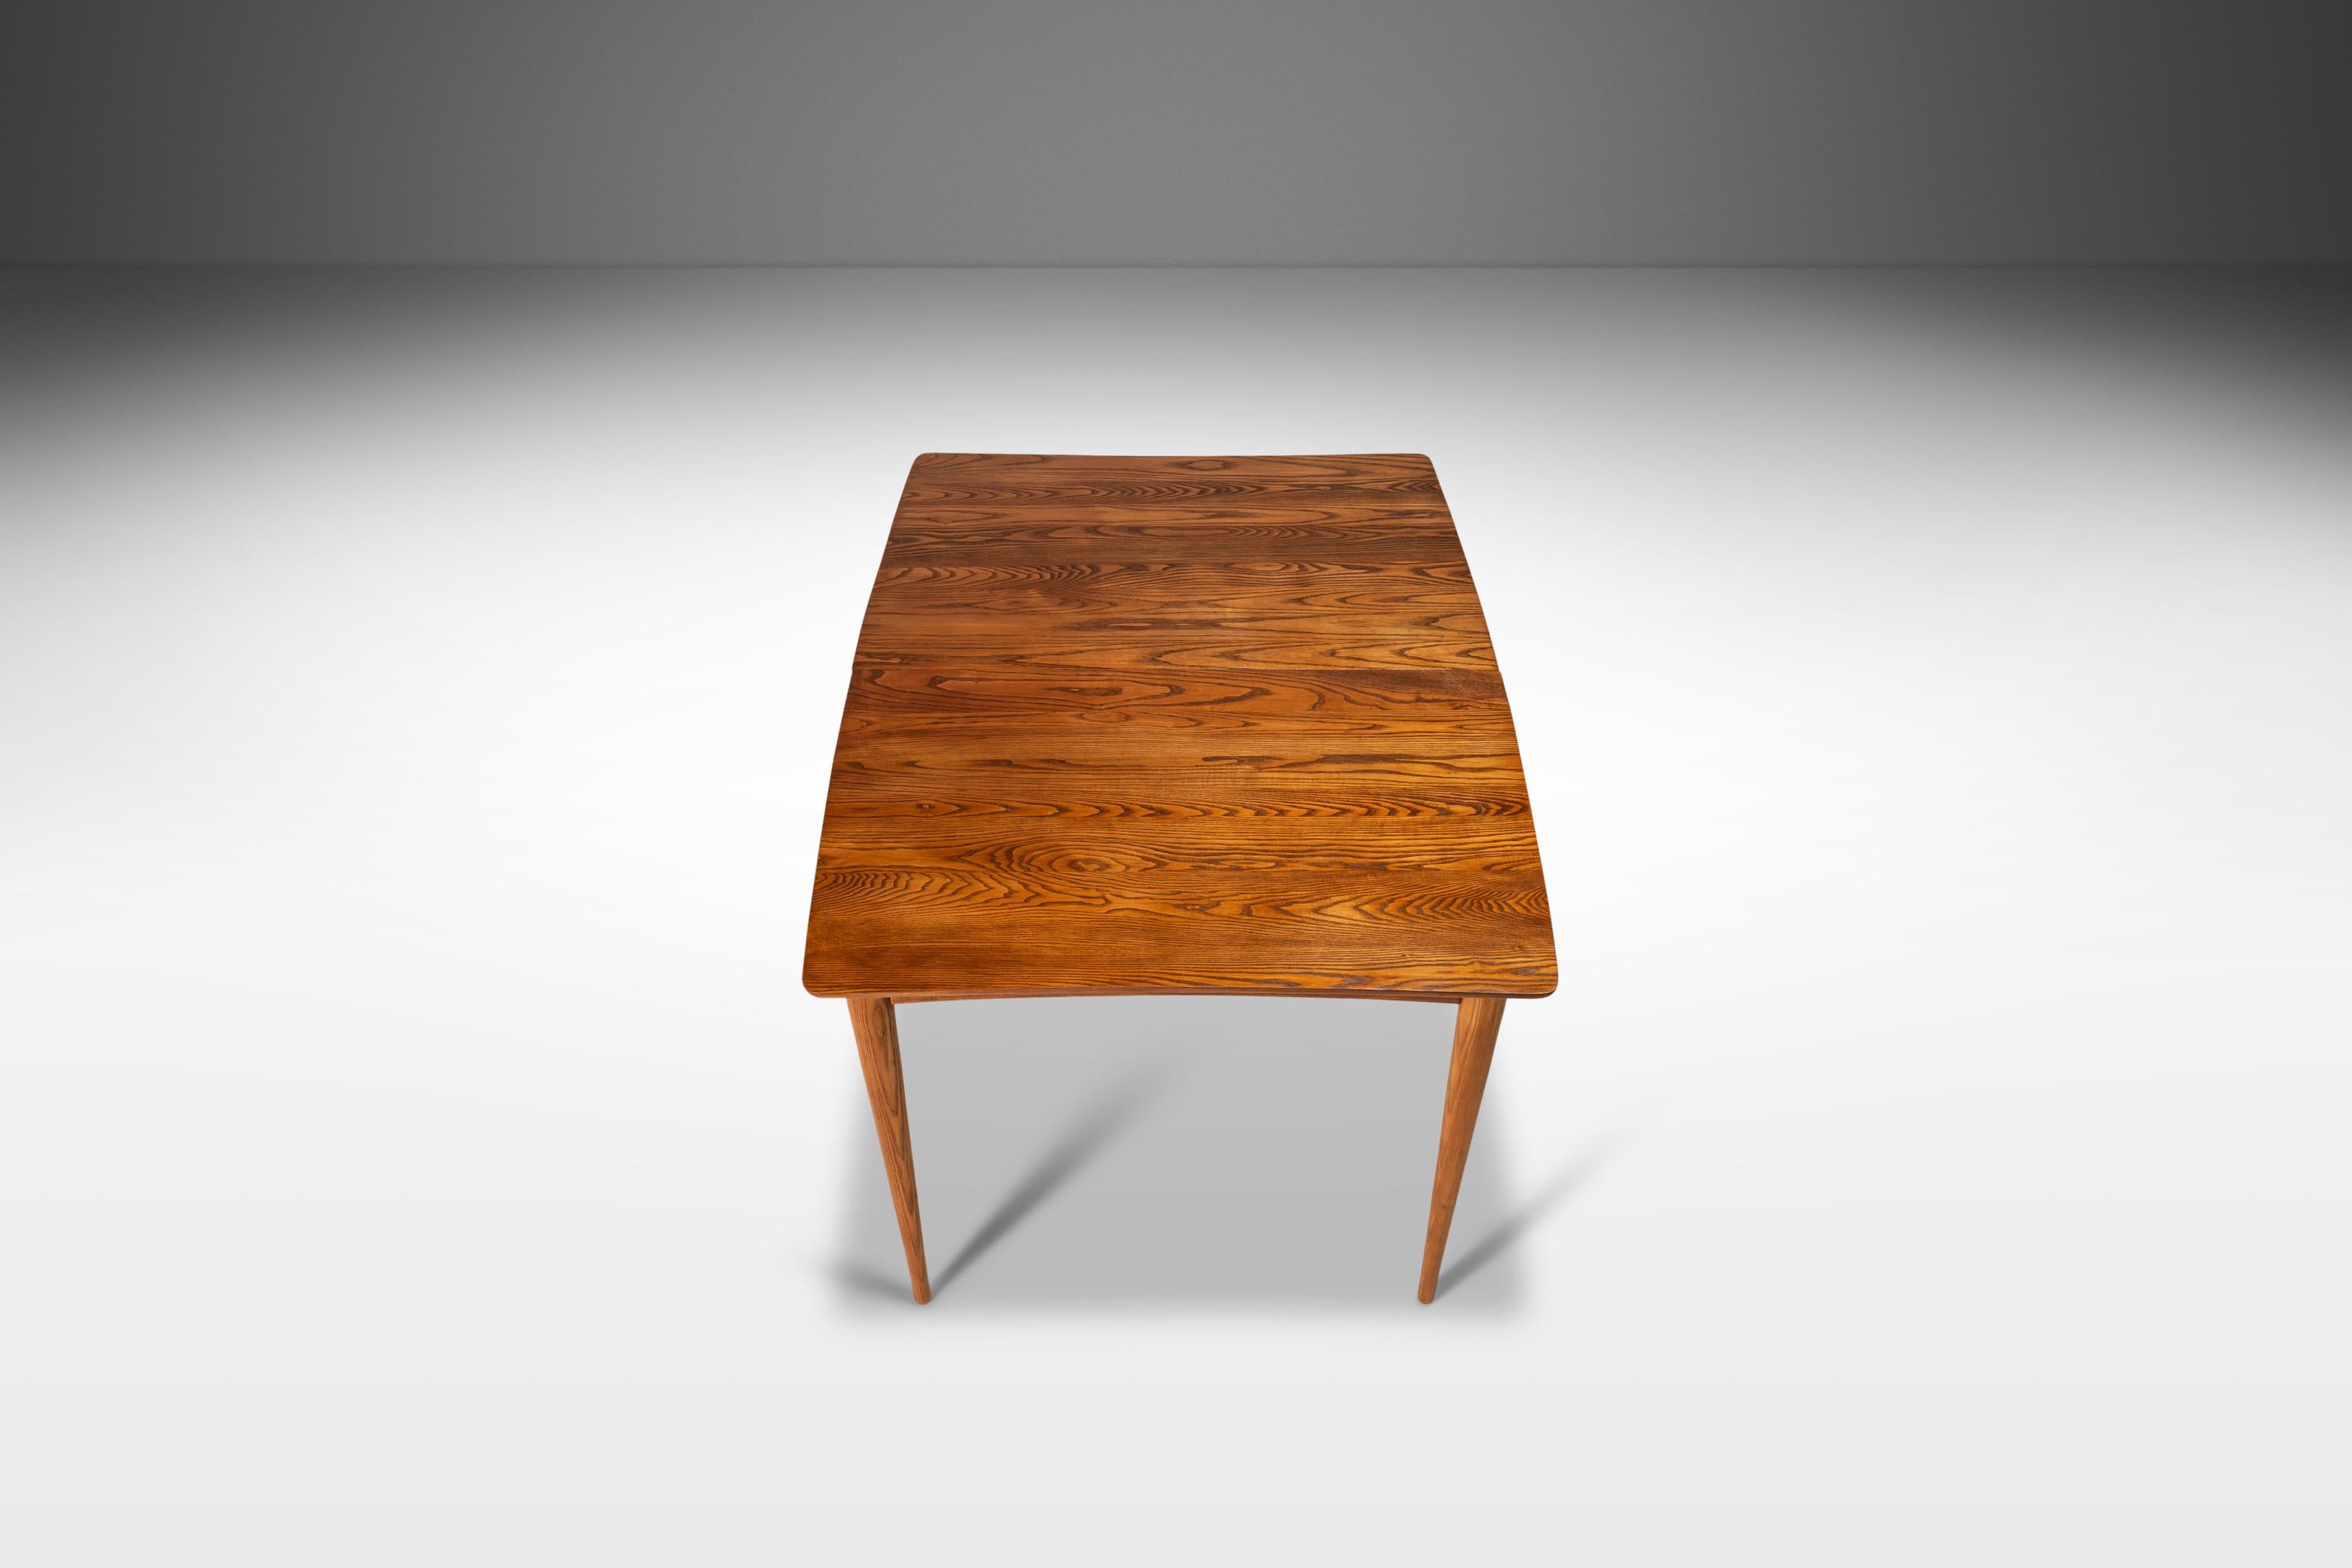 Boxwood Angular Mid-Century Modern Extension Dining Table in Solid Oak, Usa, circa 1960s For Sale